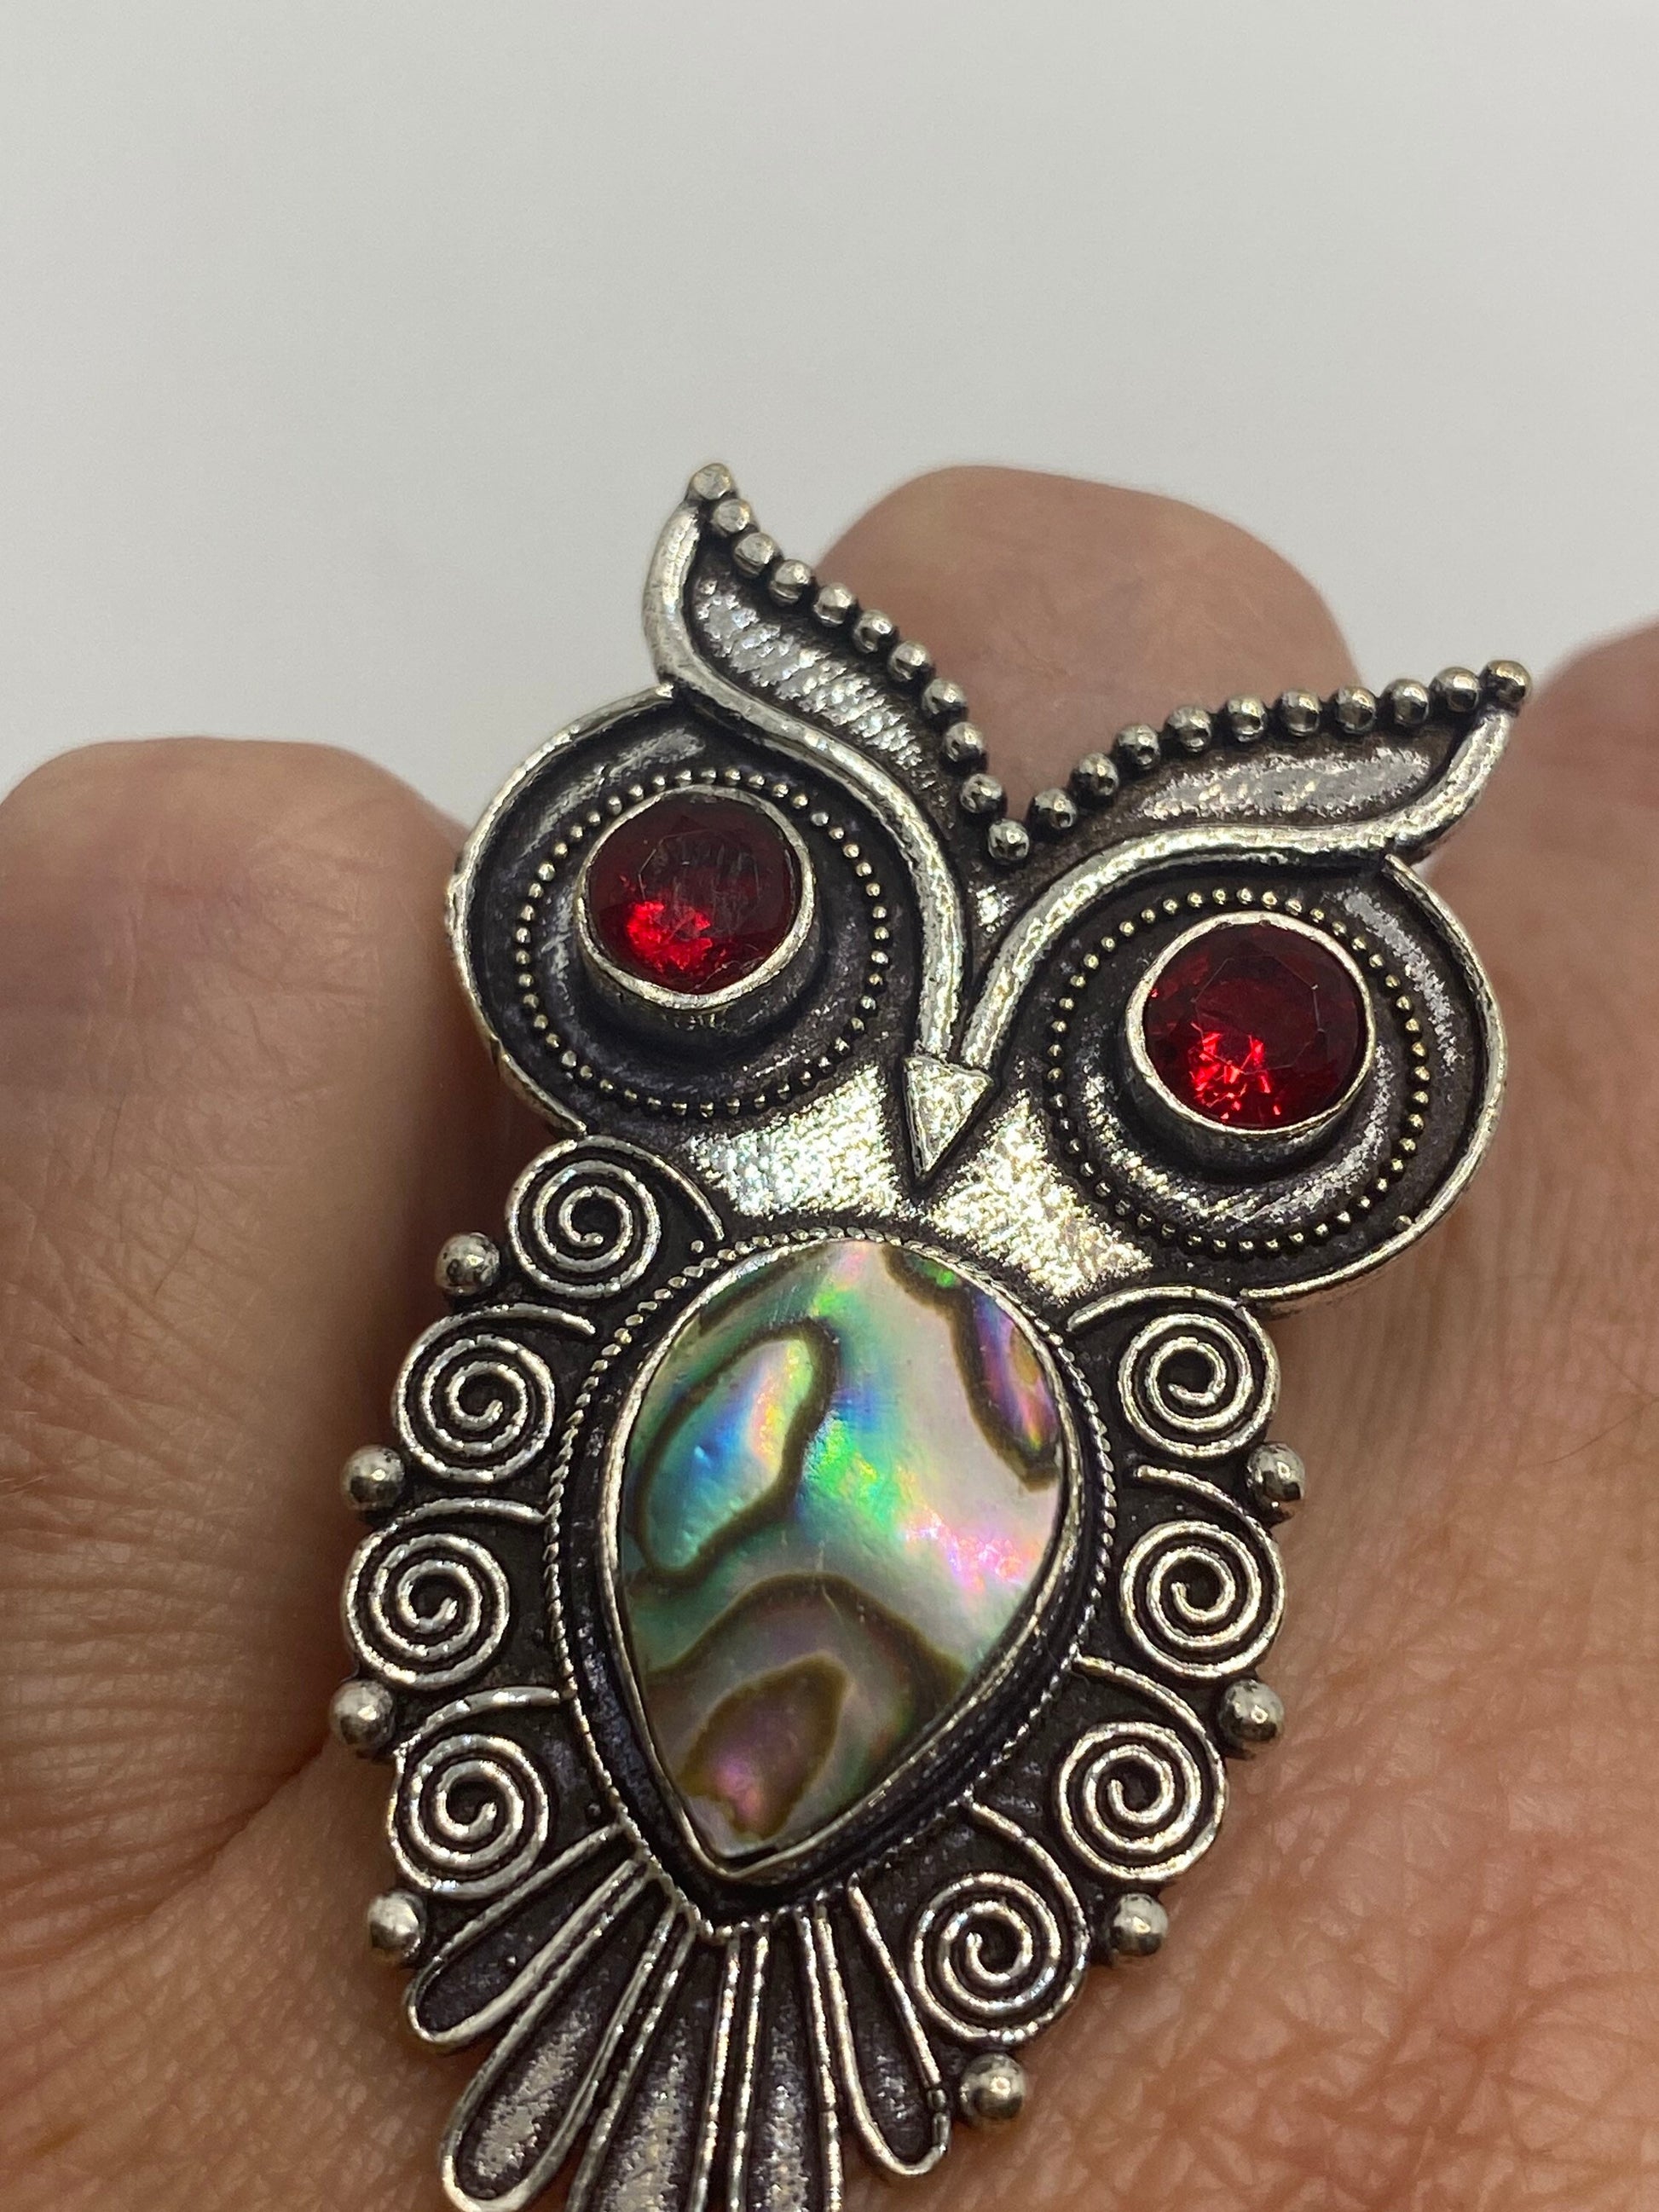 Antique Green Abalone White Bronze Silver owl Ring